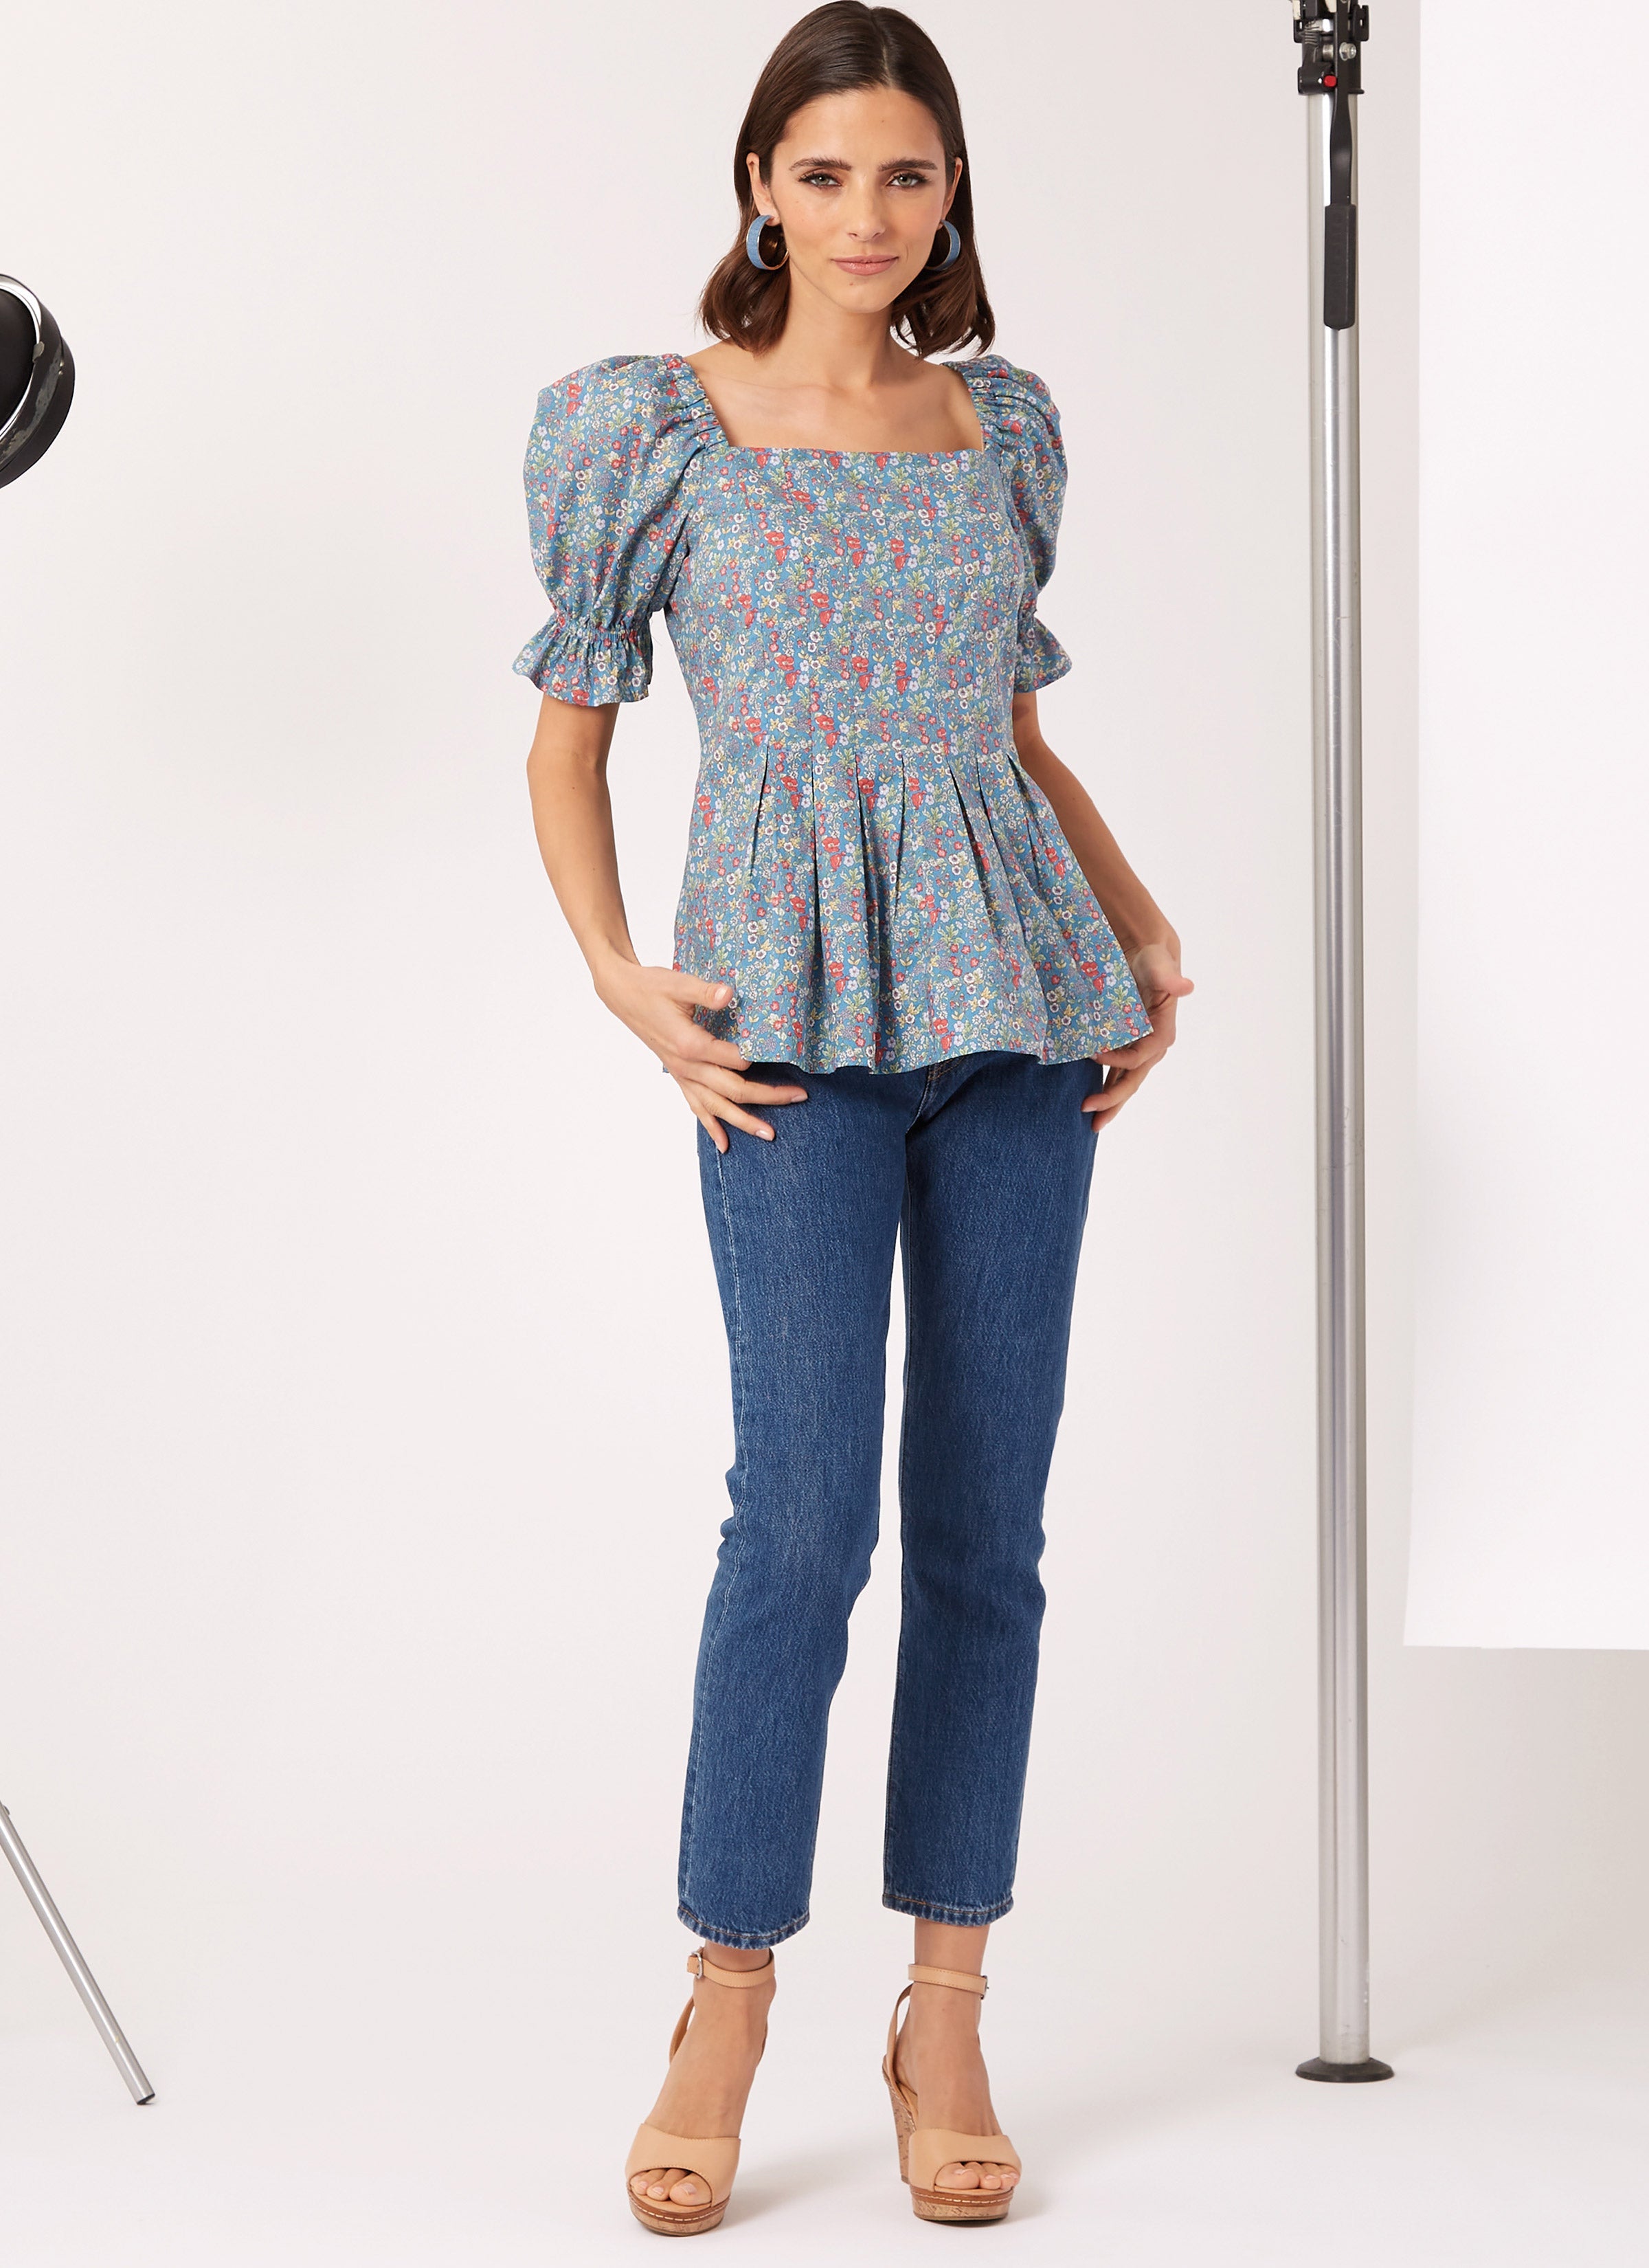 New Look sewing pattern 6754 Misses' Top With Sleeve Variations ...